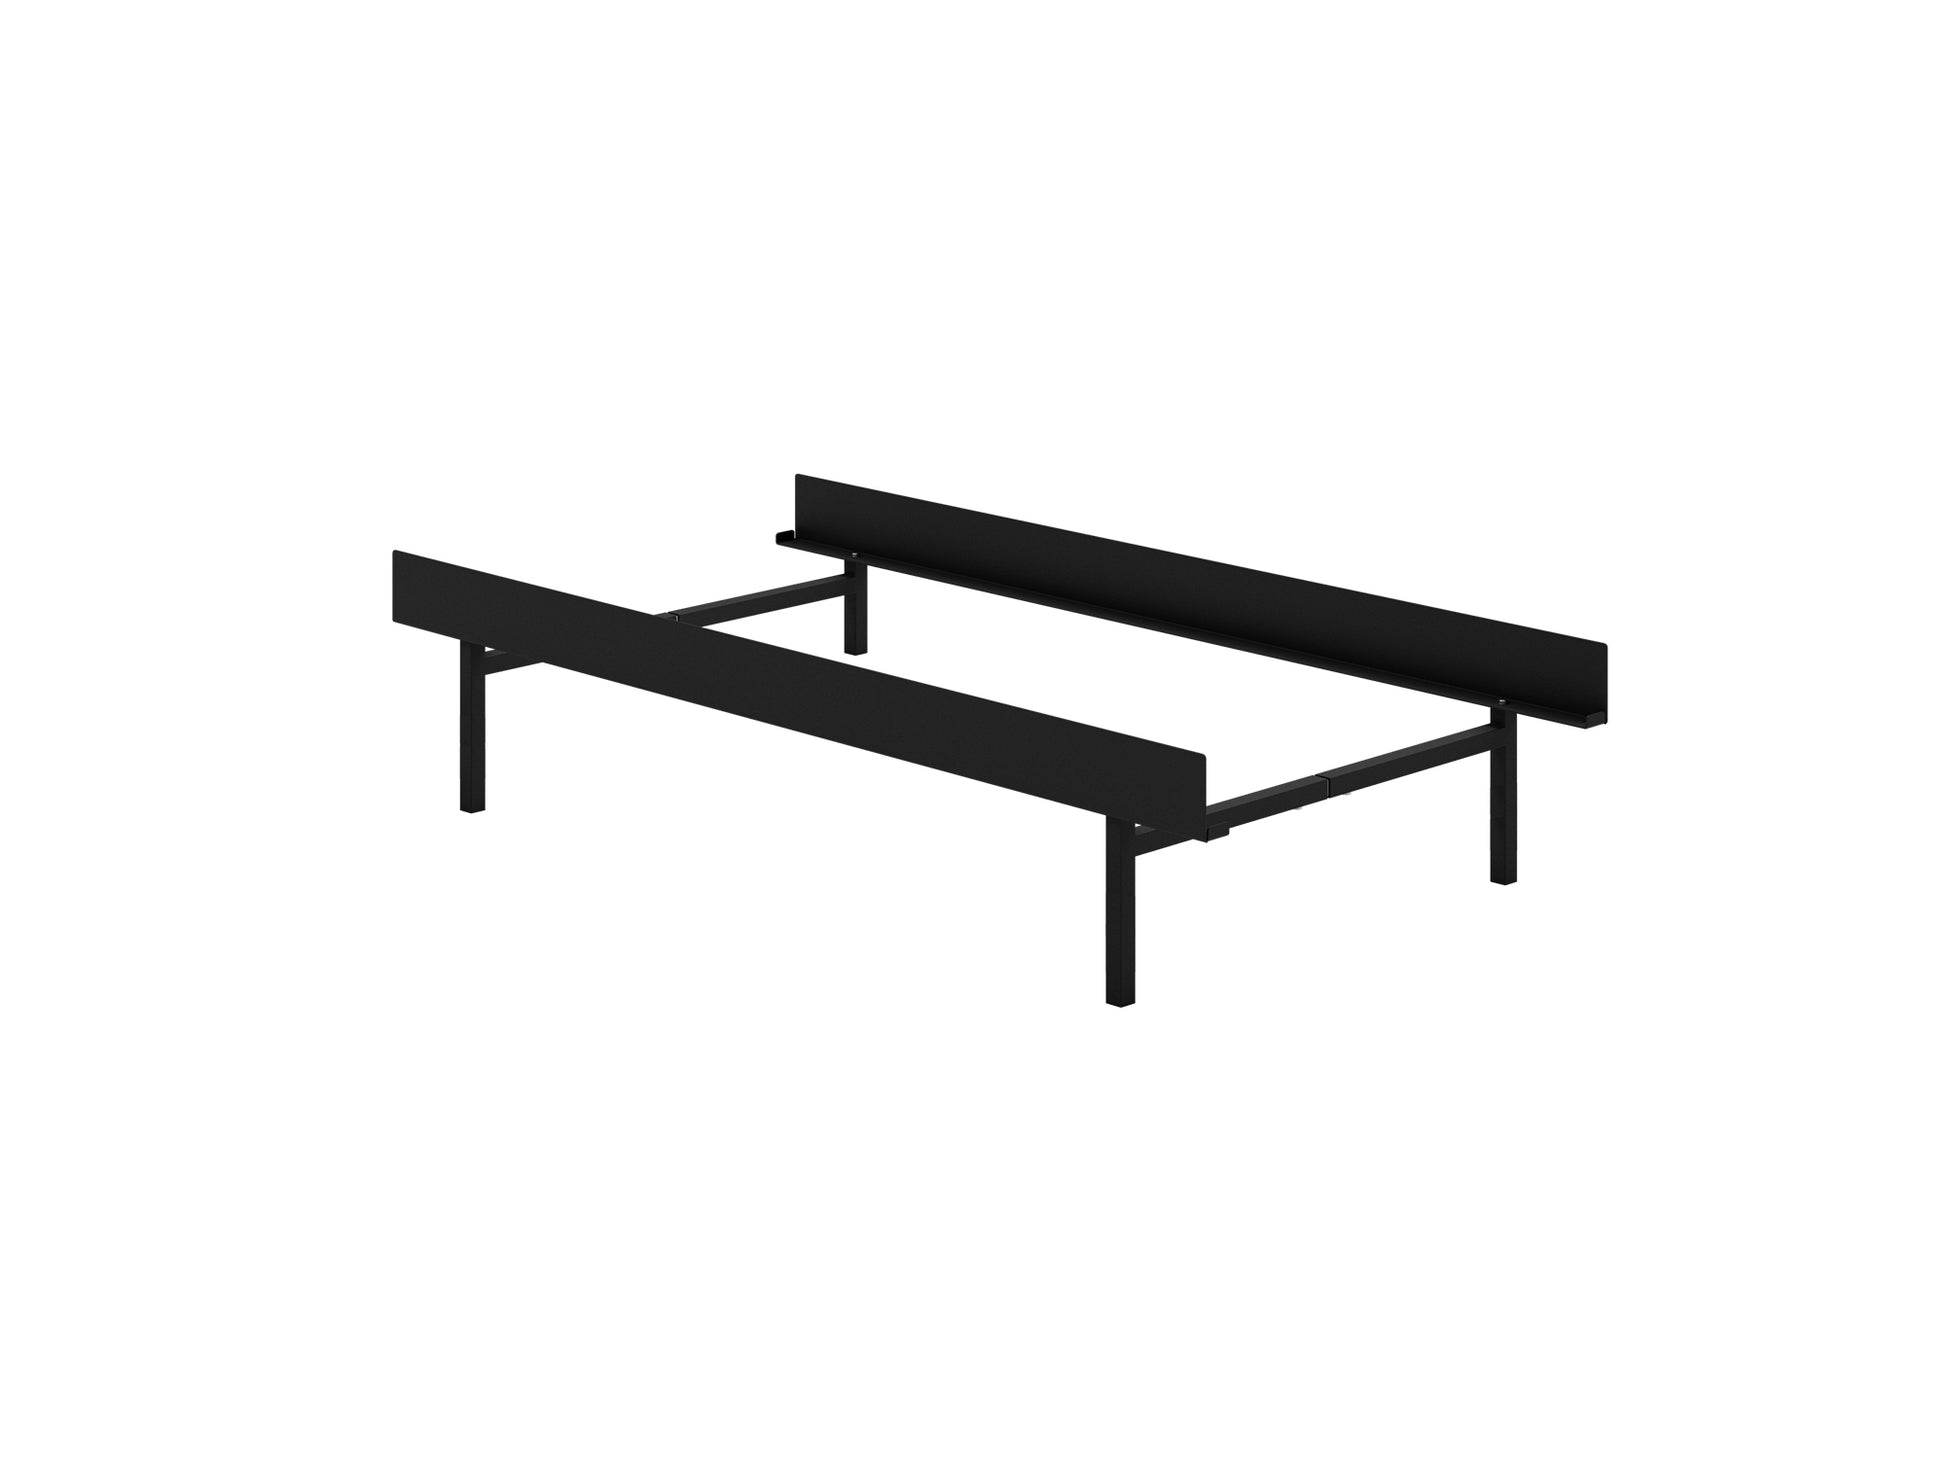 Bed 90 - 180 cm (High) by Moebe- Bed Frame / with NO SLATS / Black